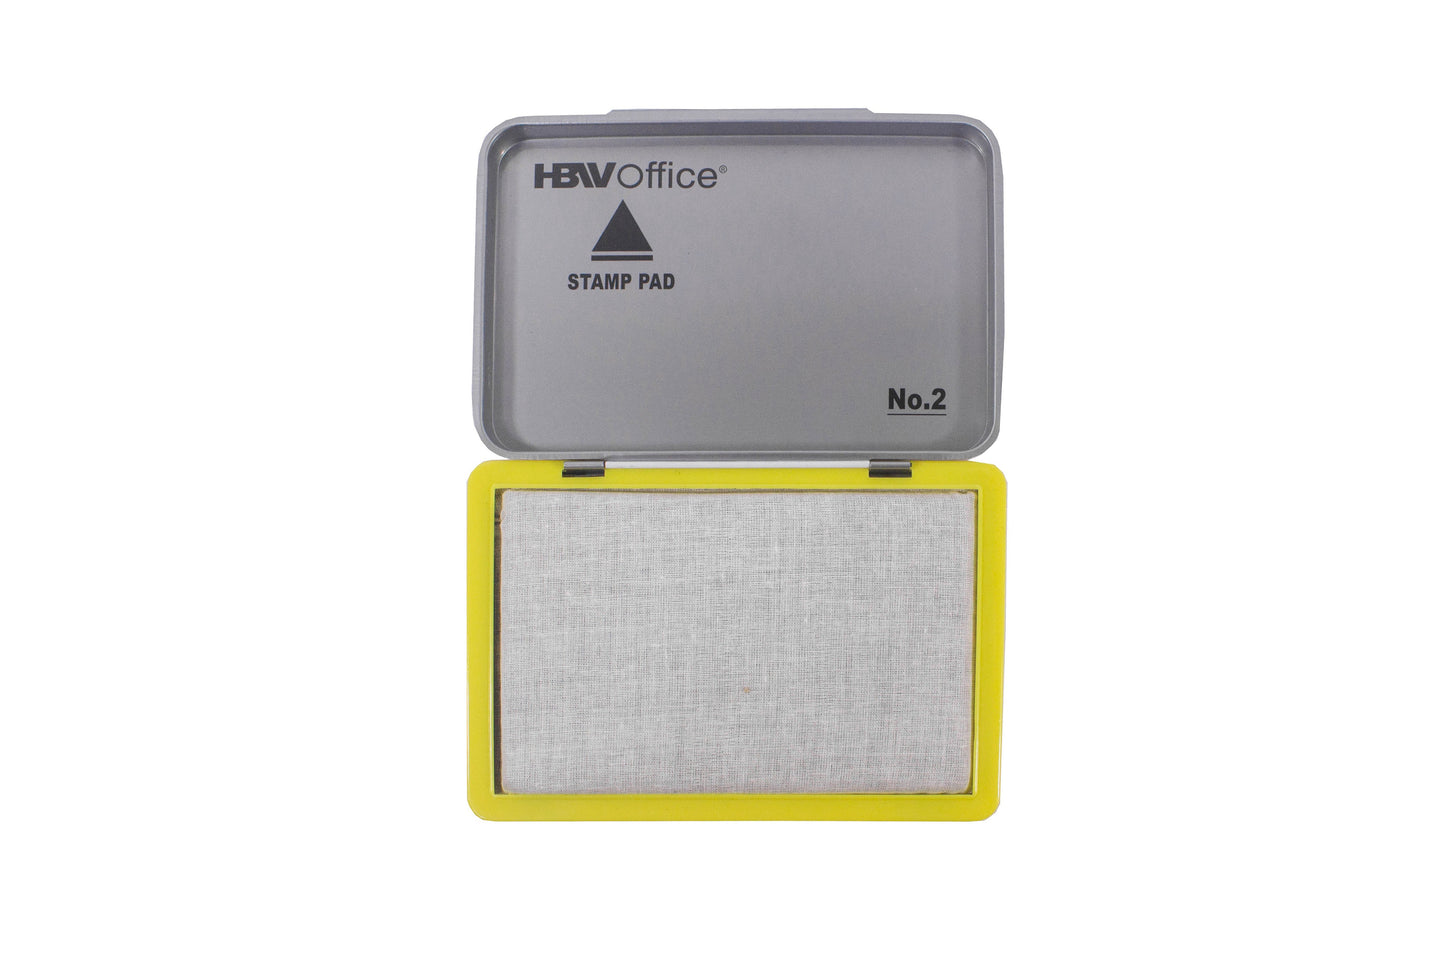 HBW Stamp Pad Without Ink No. 2 12pcs